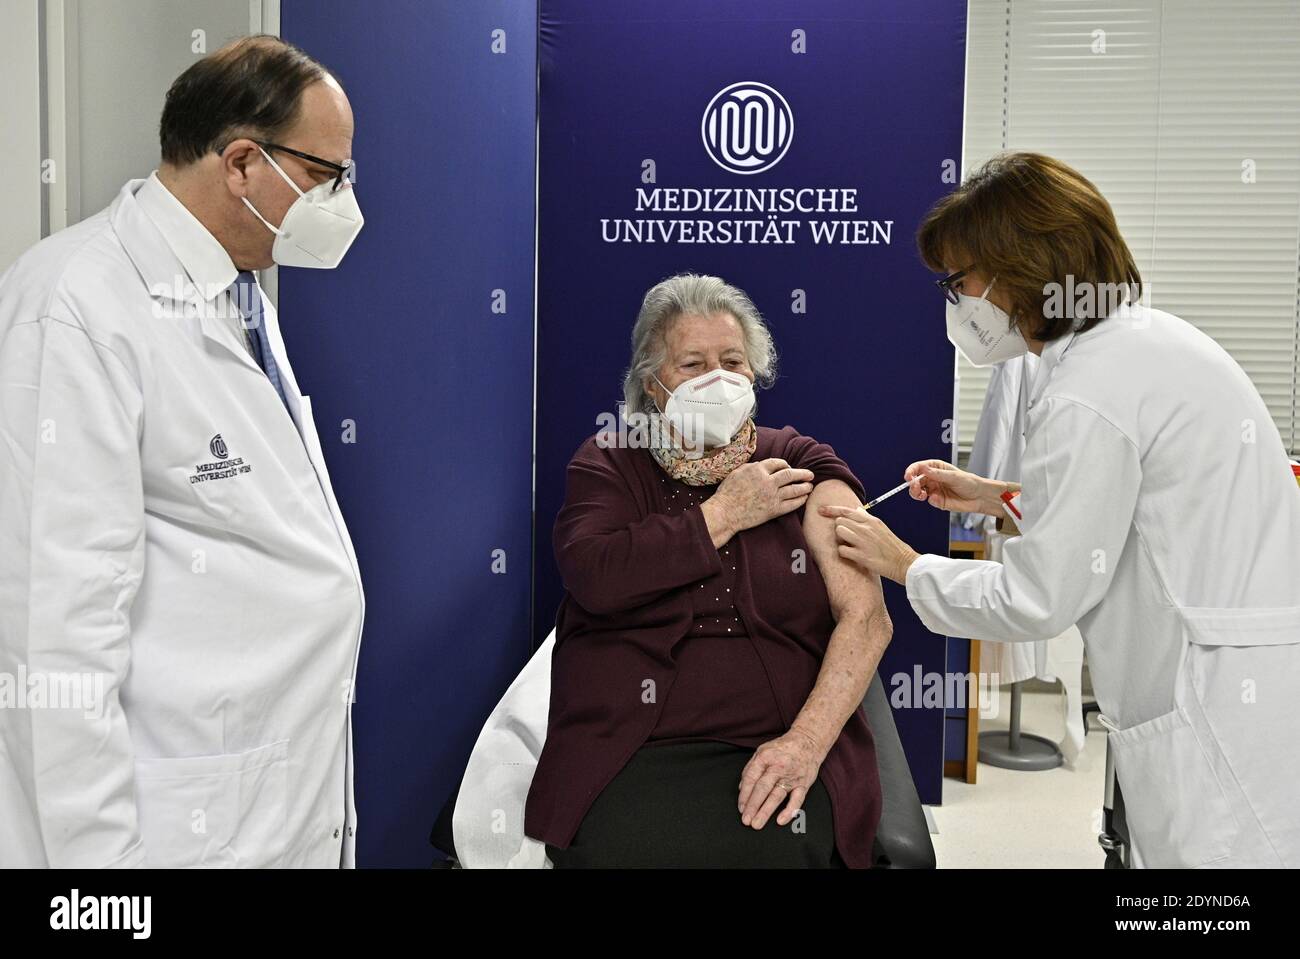 An elderly woman receives the first Pfizer/BioNTech COVID-19 vaccine at the MedUni Wien in Vienna, Austria December 27, 2020, the day when the country starts its vaccination programme. Hans Punz/Pool via Reuters Stock Photo